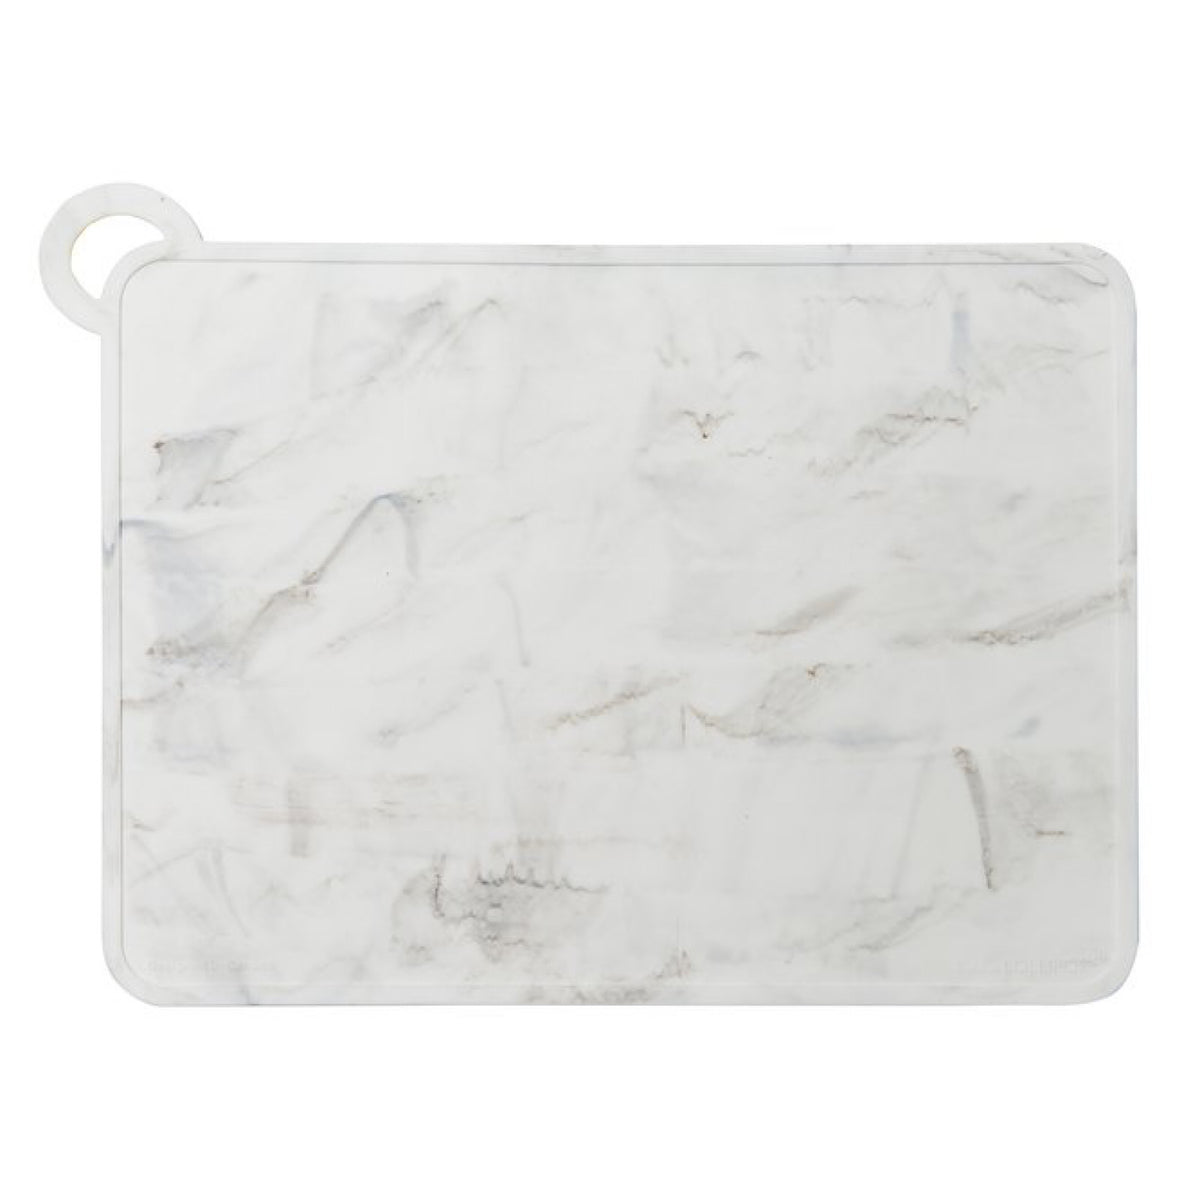 Silicone Placemat, Marble